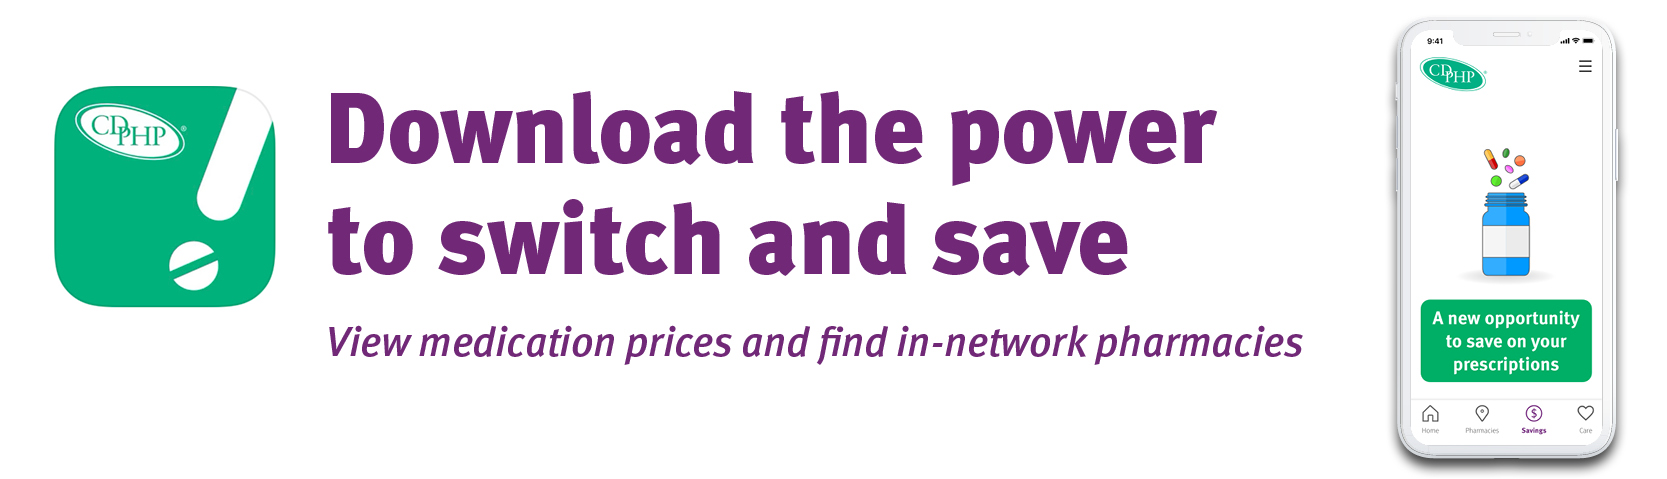 Download the power to switch and save. View Medication prices and find in-network phramacies.